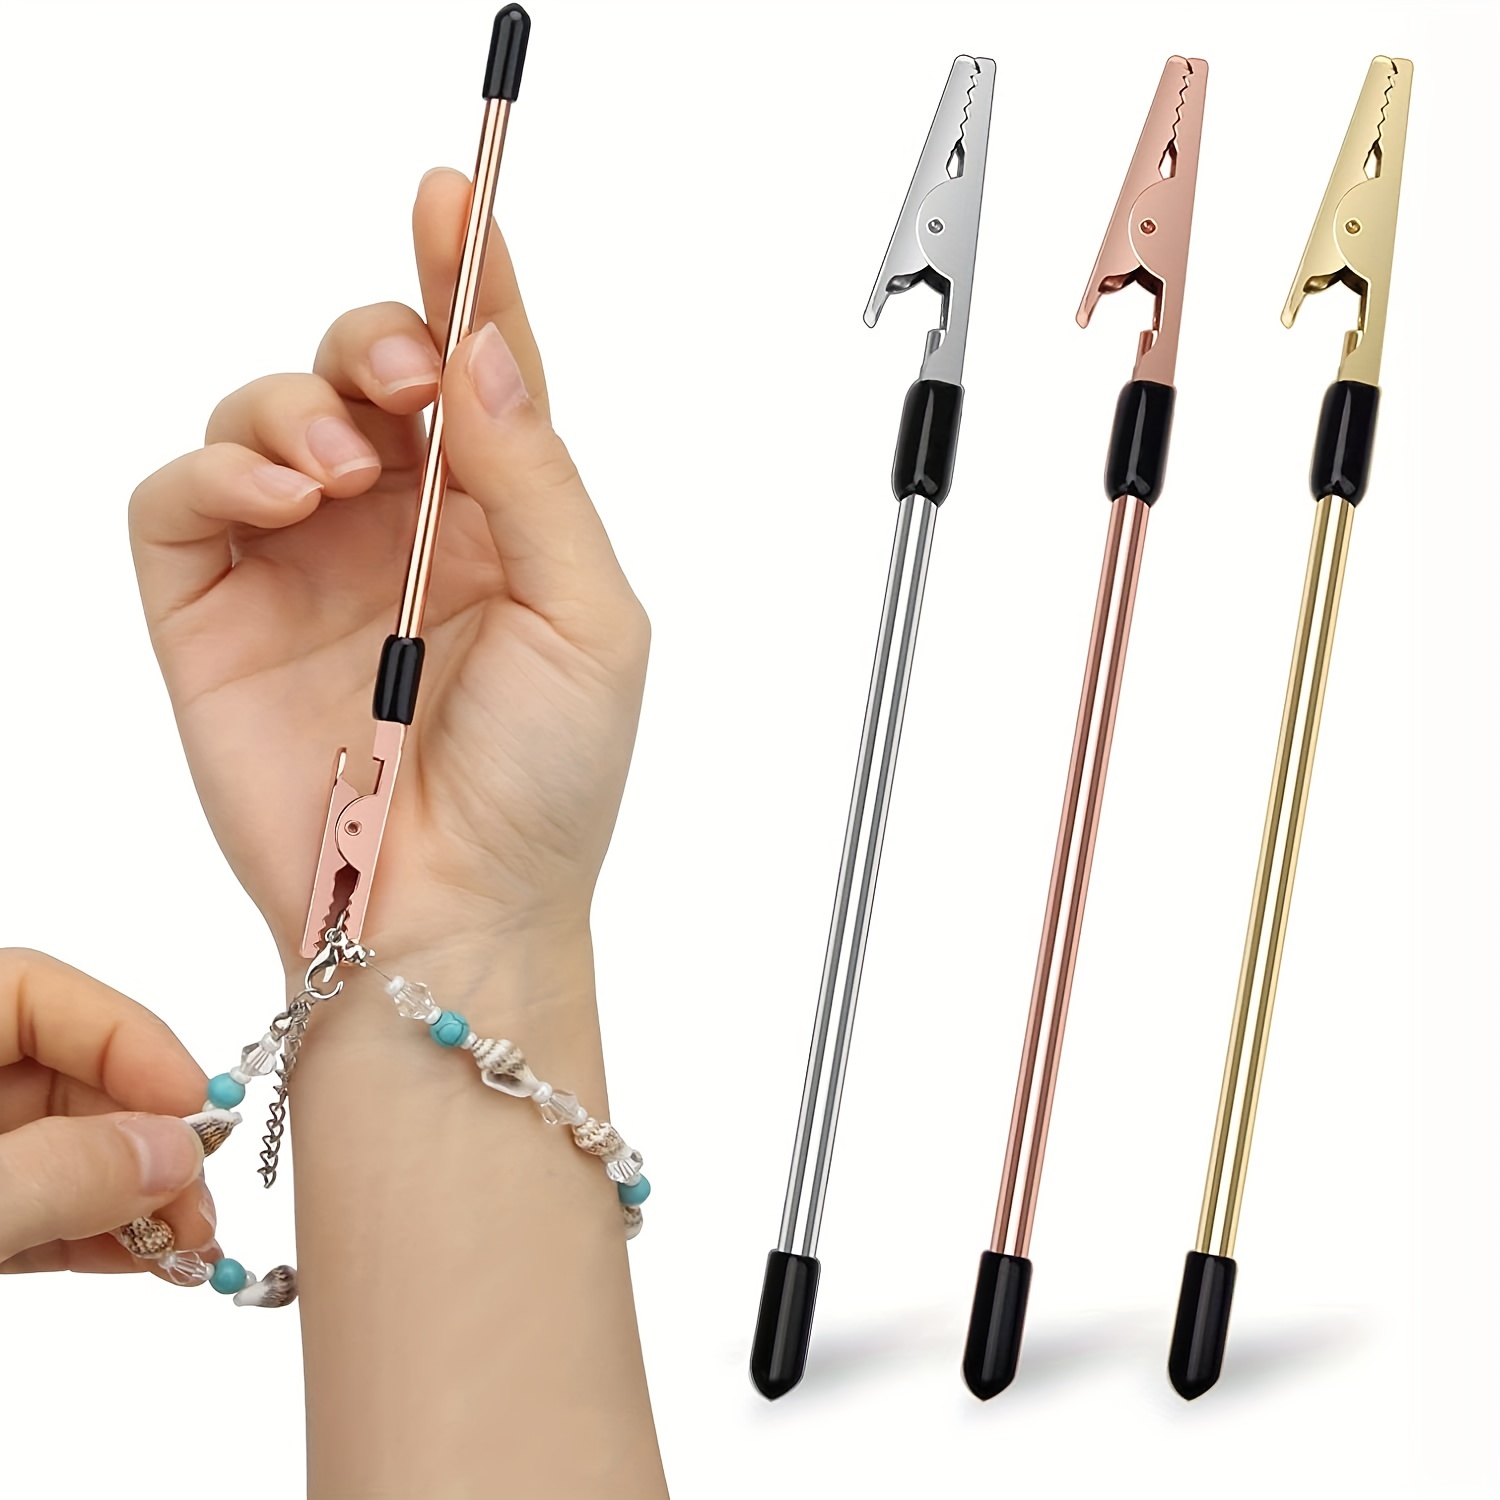 1pc Bracelet Jewelry Wearing Helper, Tool For Fastening, Hooking, Clasping  & Zippering Bracelets, Necklaces & Watches